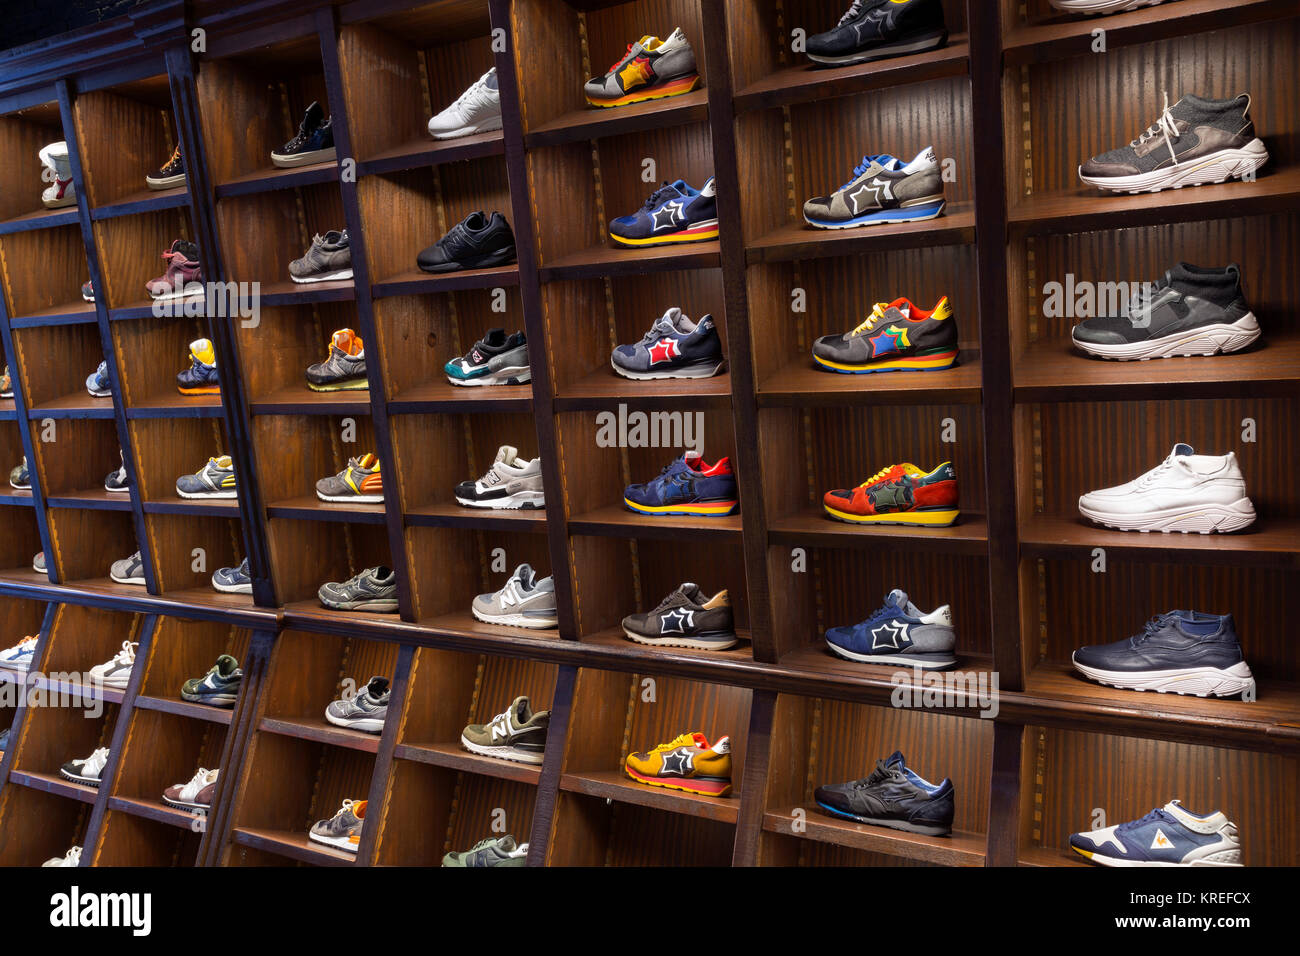 Sneakers of a store, Milano, Italy Stock Photo -